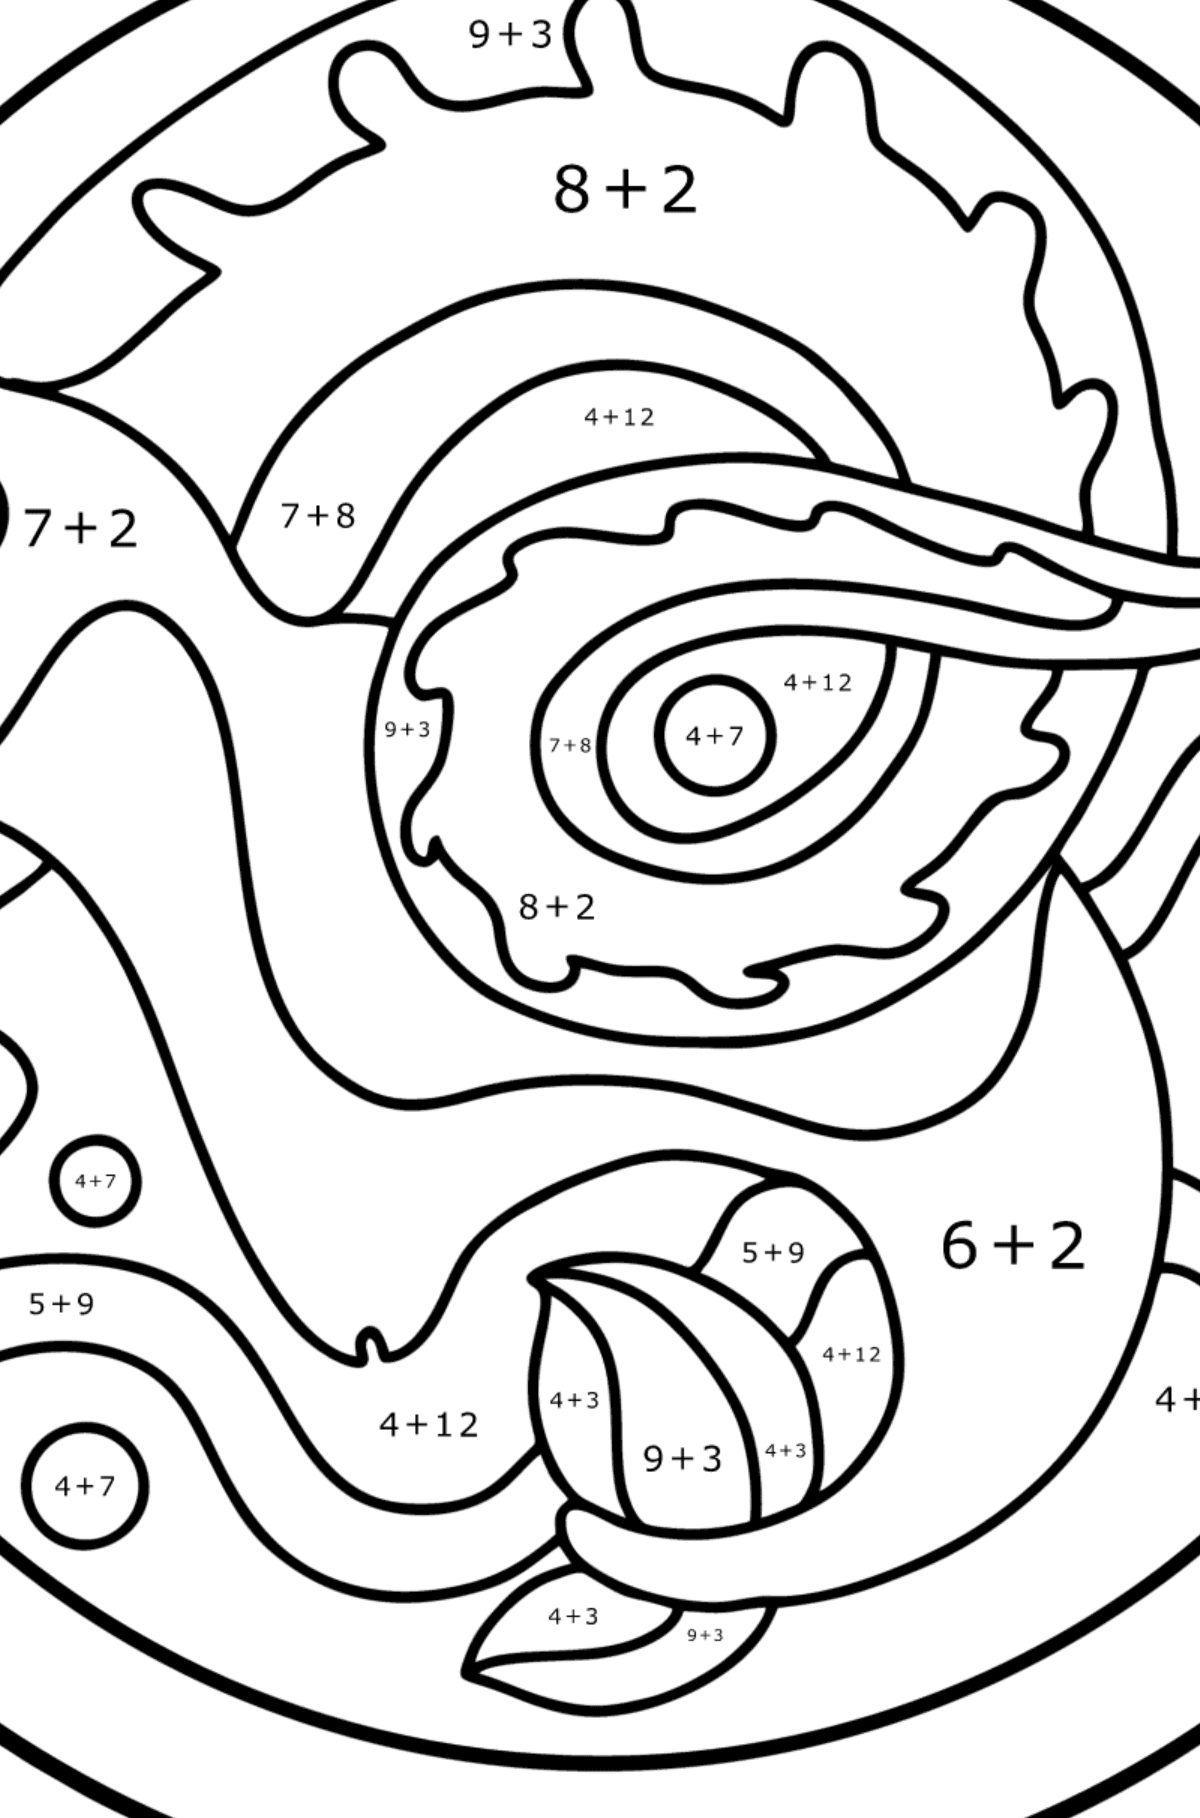 Coloring page for kids - Capricorn zodiac sign - Math Coloring - Addition for Kids